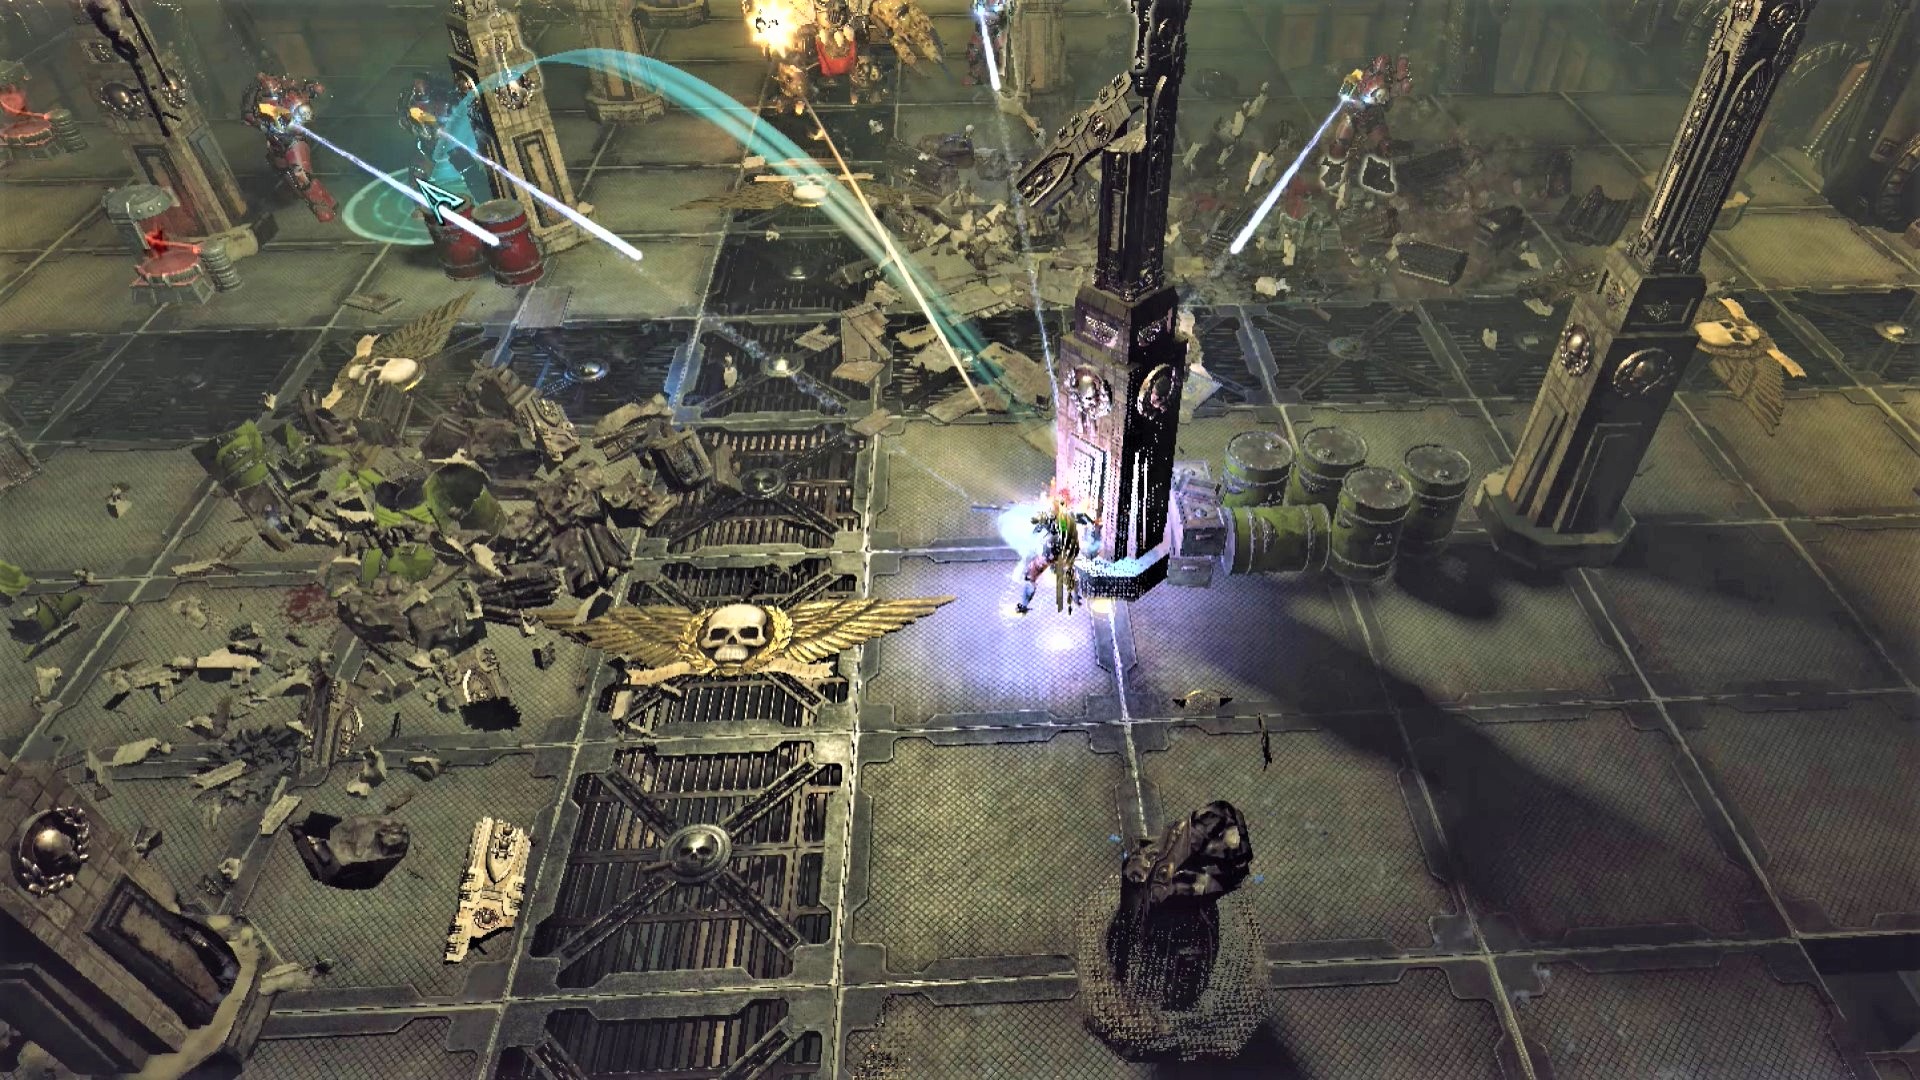 Best Warhammer 40K videogames Inquisitor Martyr screenshot showing desctructible scenery and firing lines